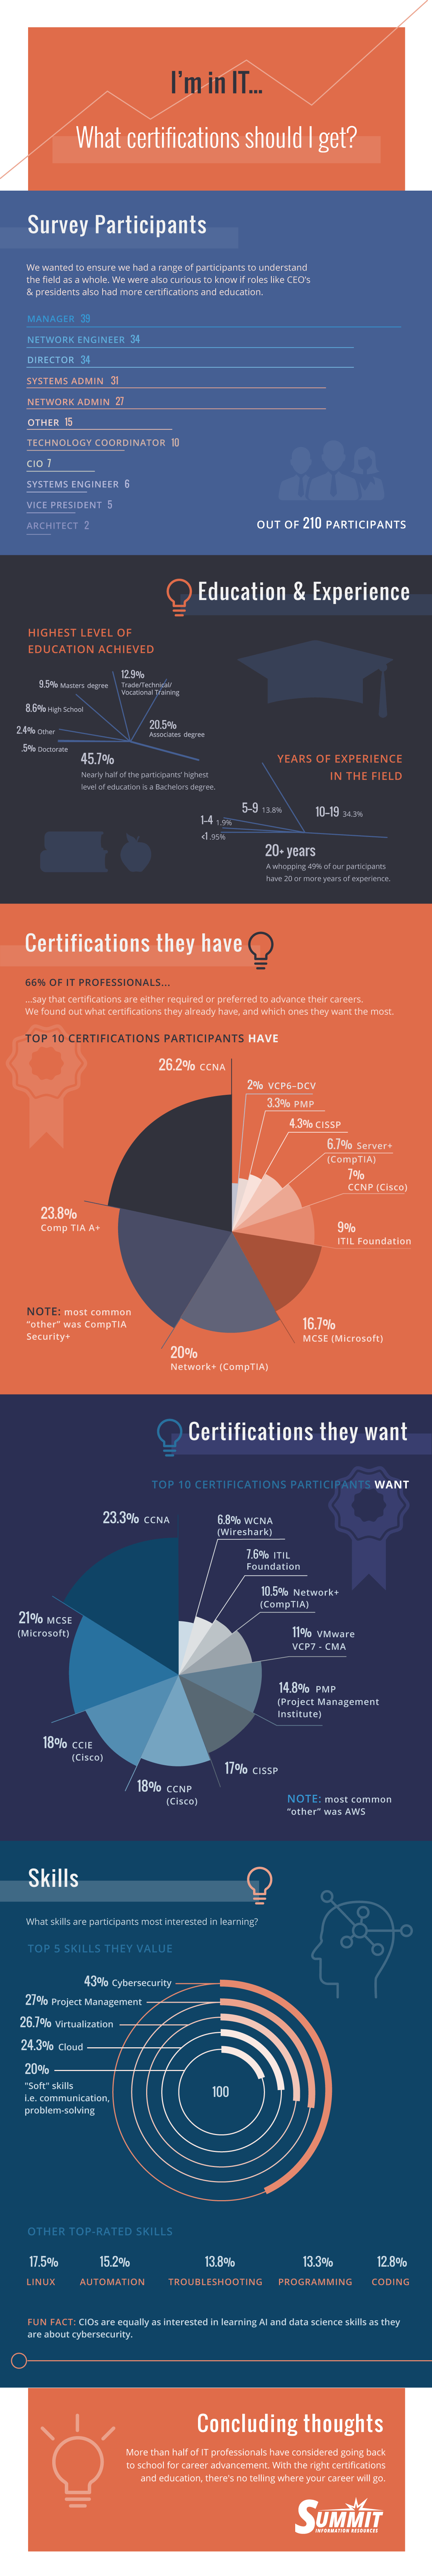 infographic of certifications including IT professionals' experience level and desired certifications